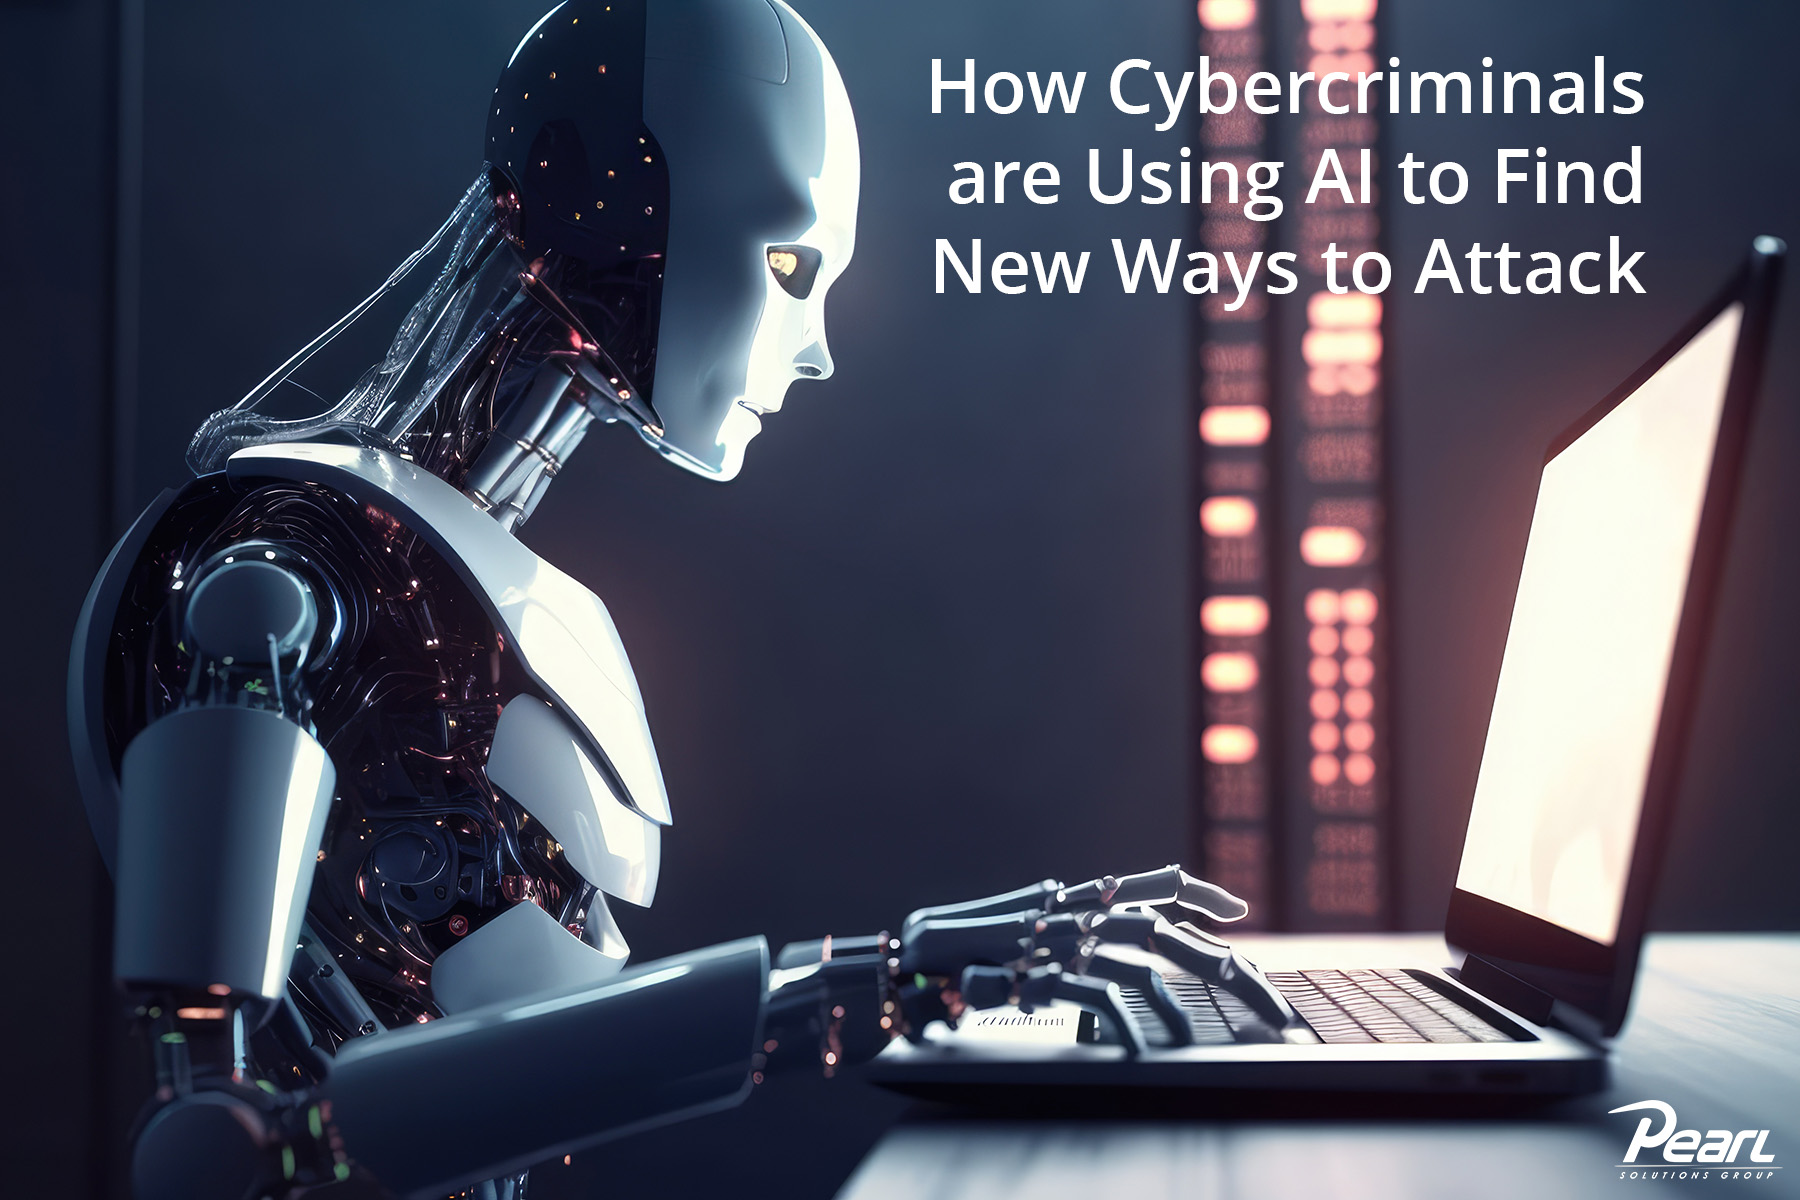 How Cybercriminals are using AI to Attack